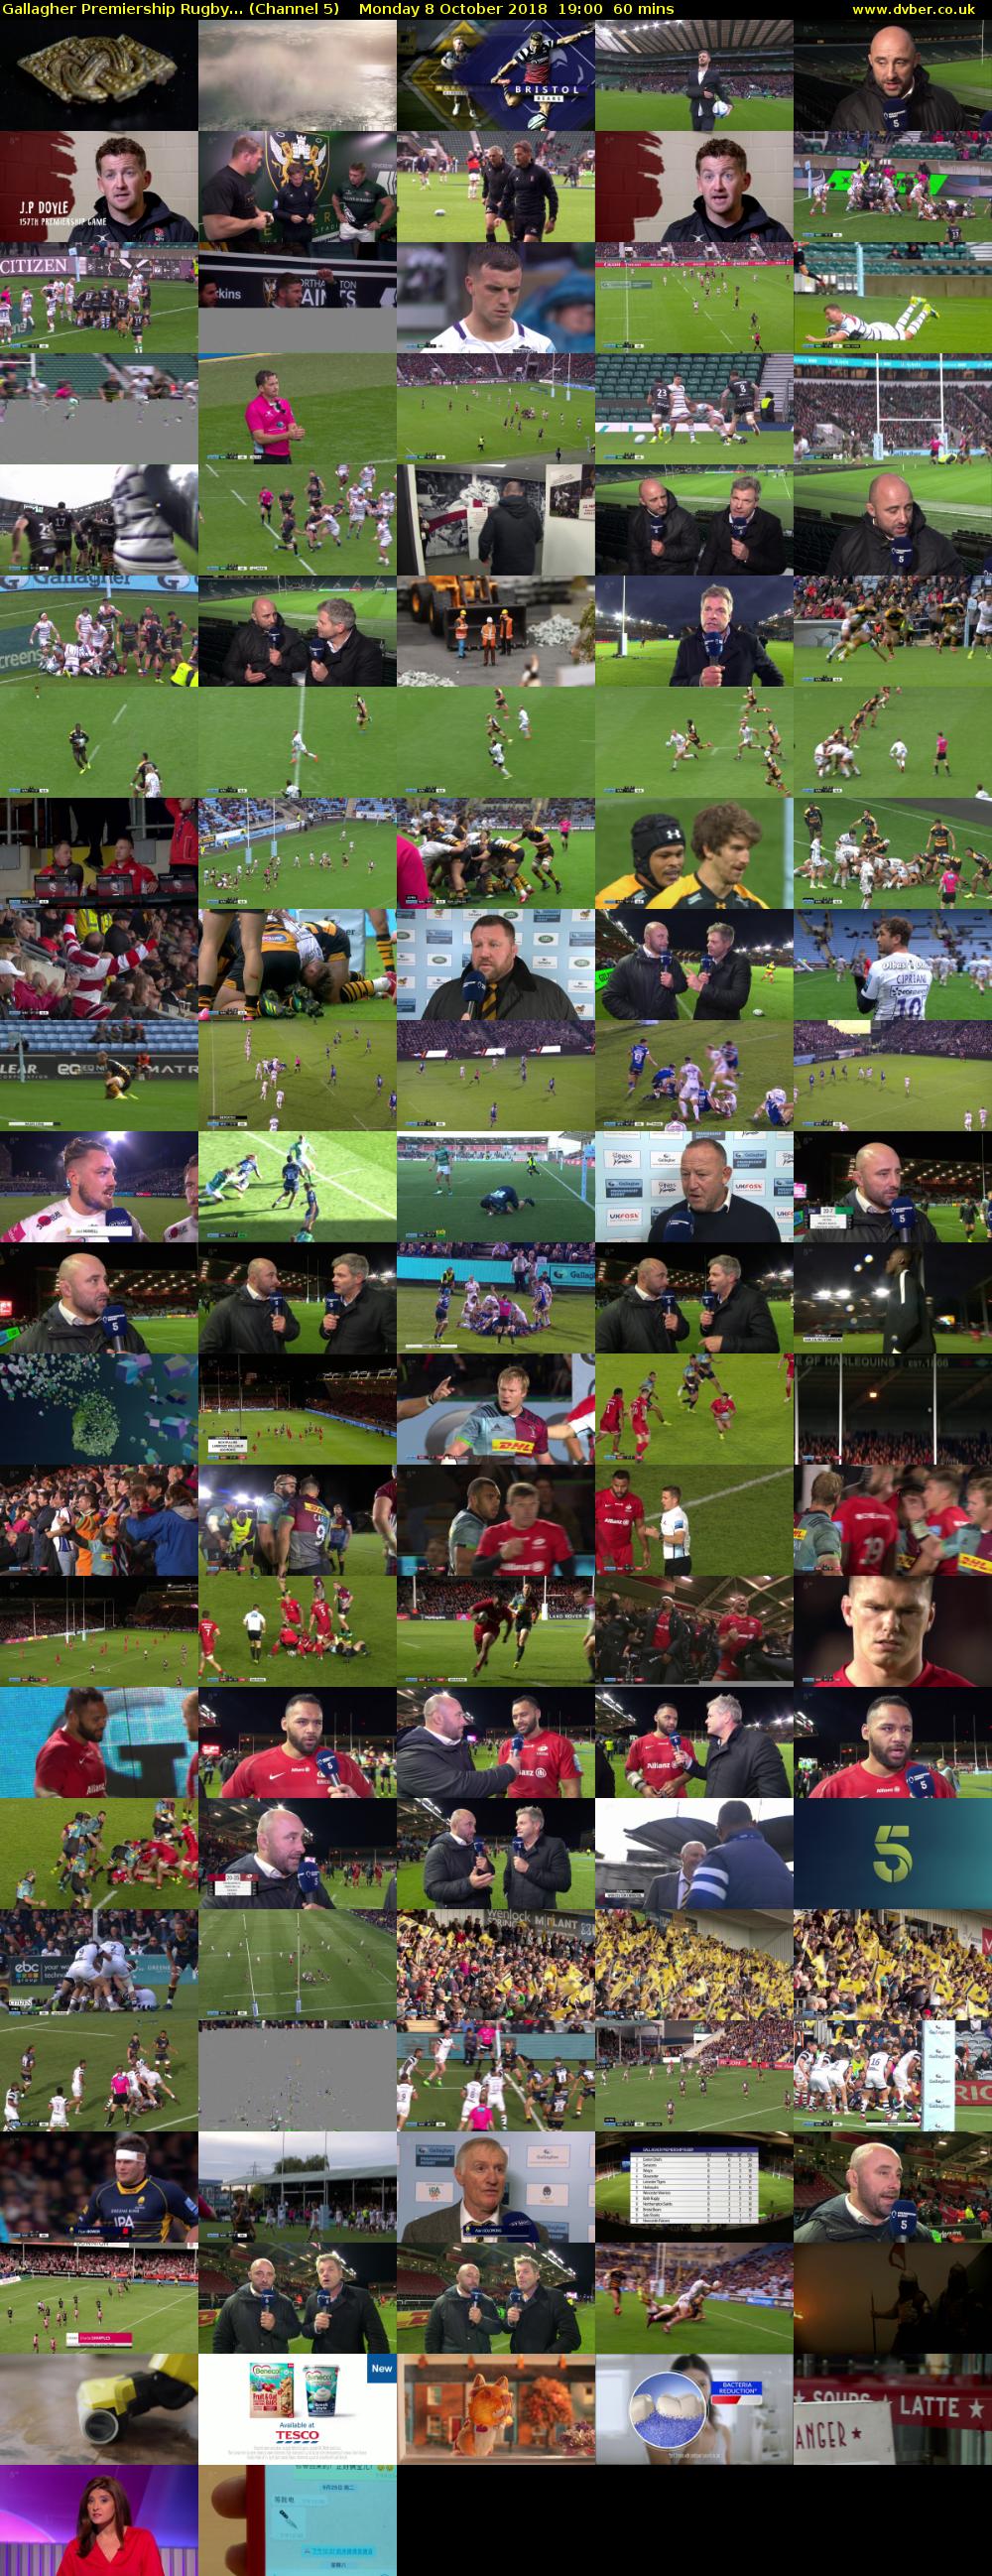 Gallagher Premiership Rugby... (Channel 5) Monday 8 October 2018 19:00 - 20:00